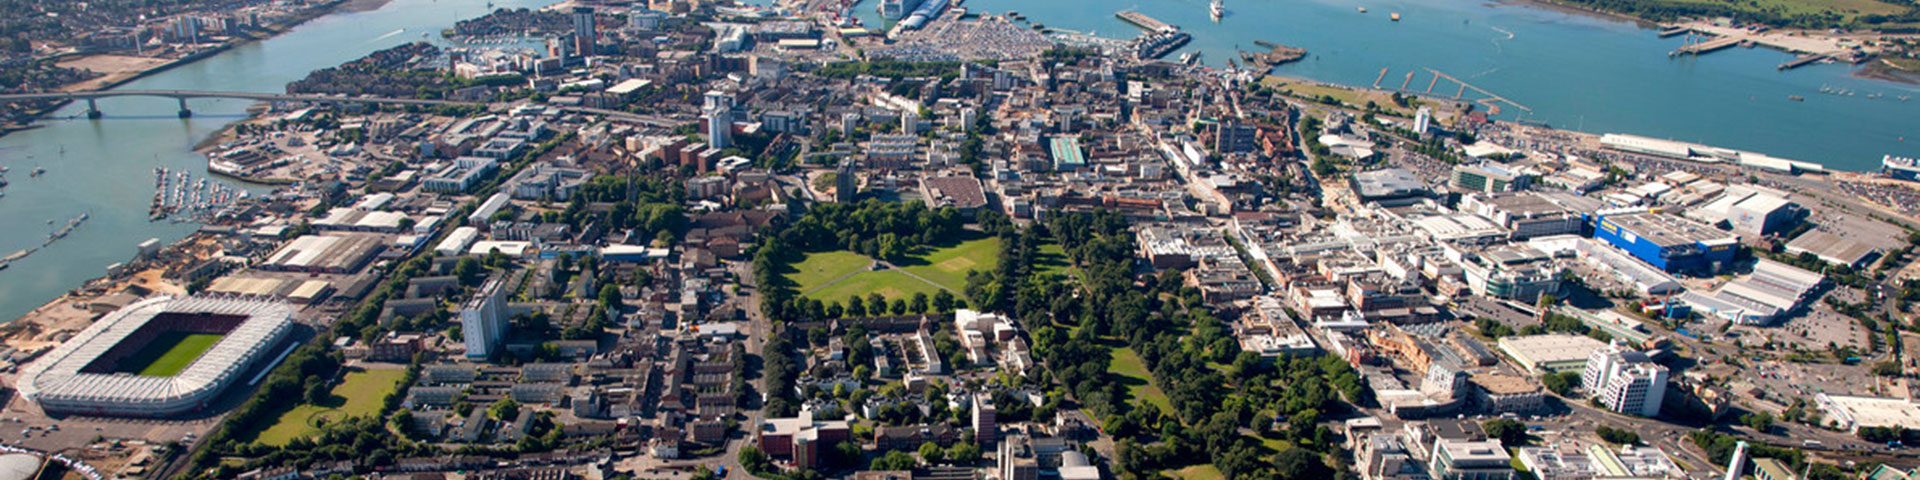 A colour picture of Southampton from the air showing the city centre, football ground, edge of the New Forest and the water.